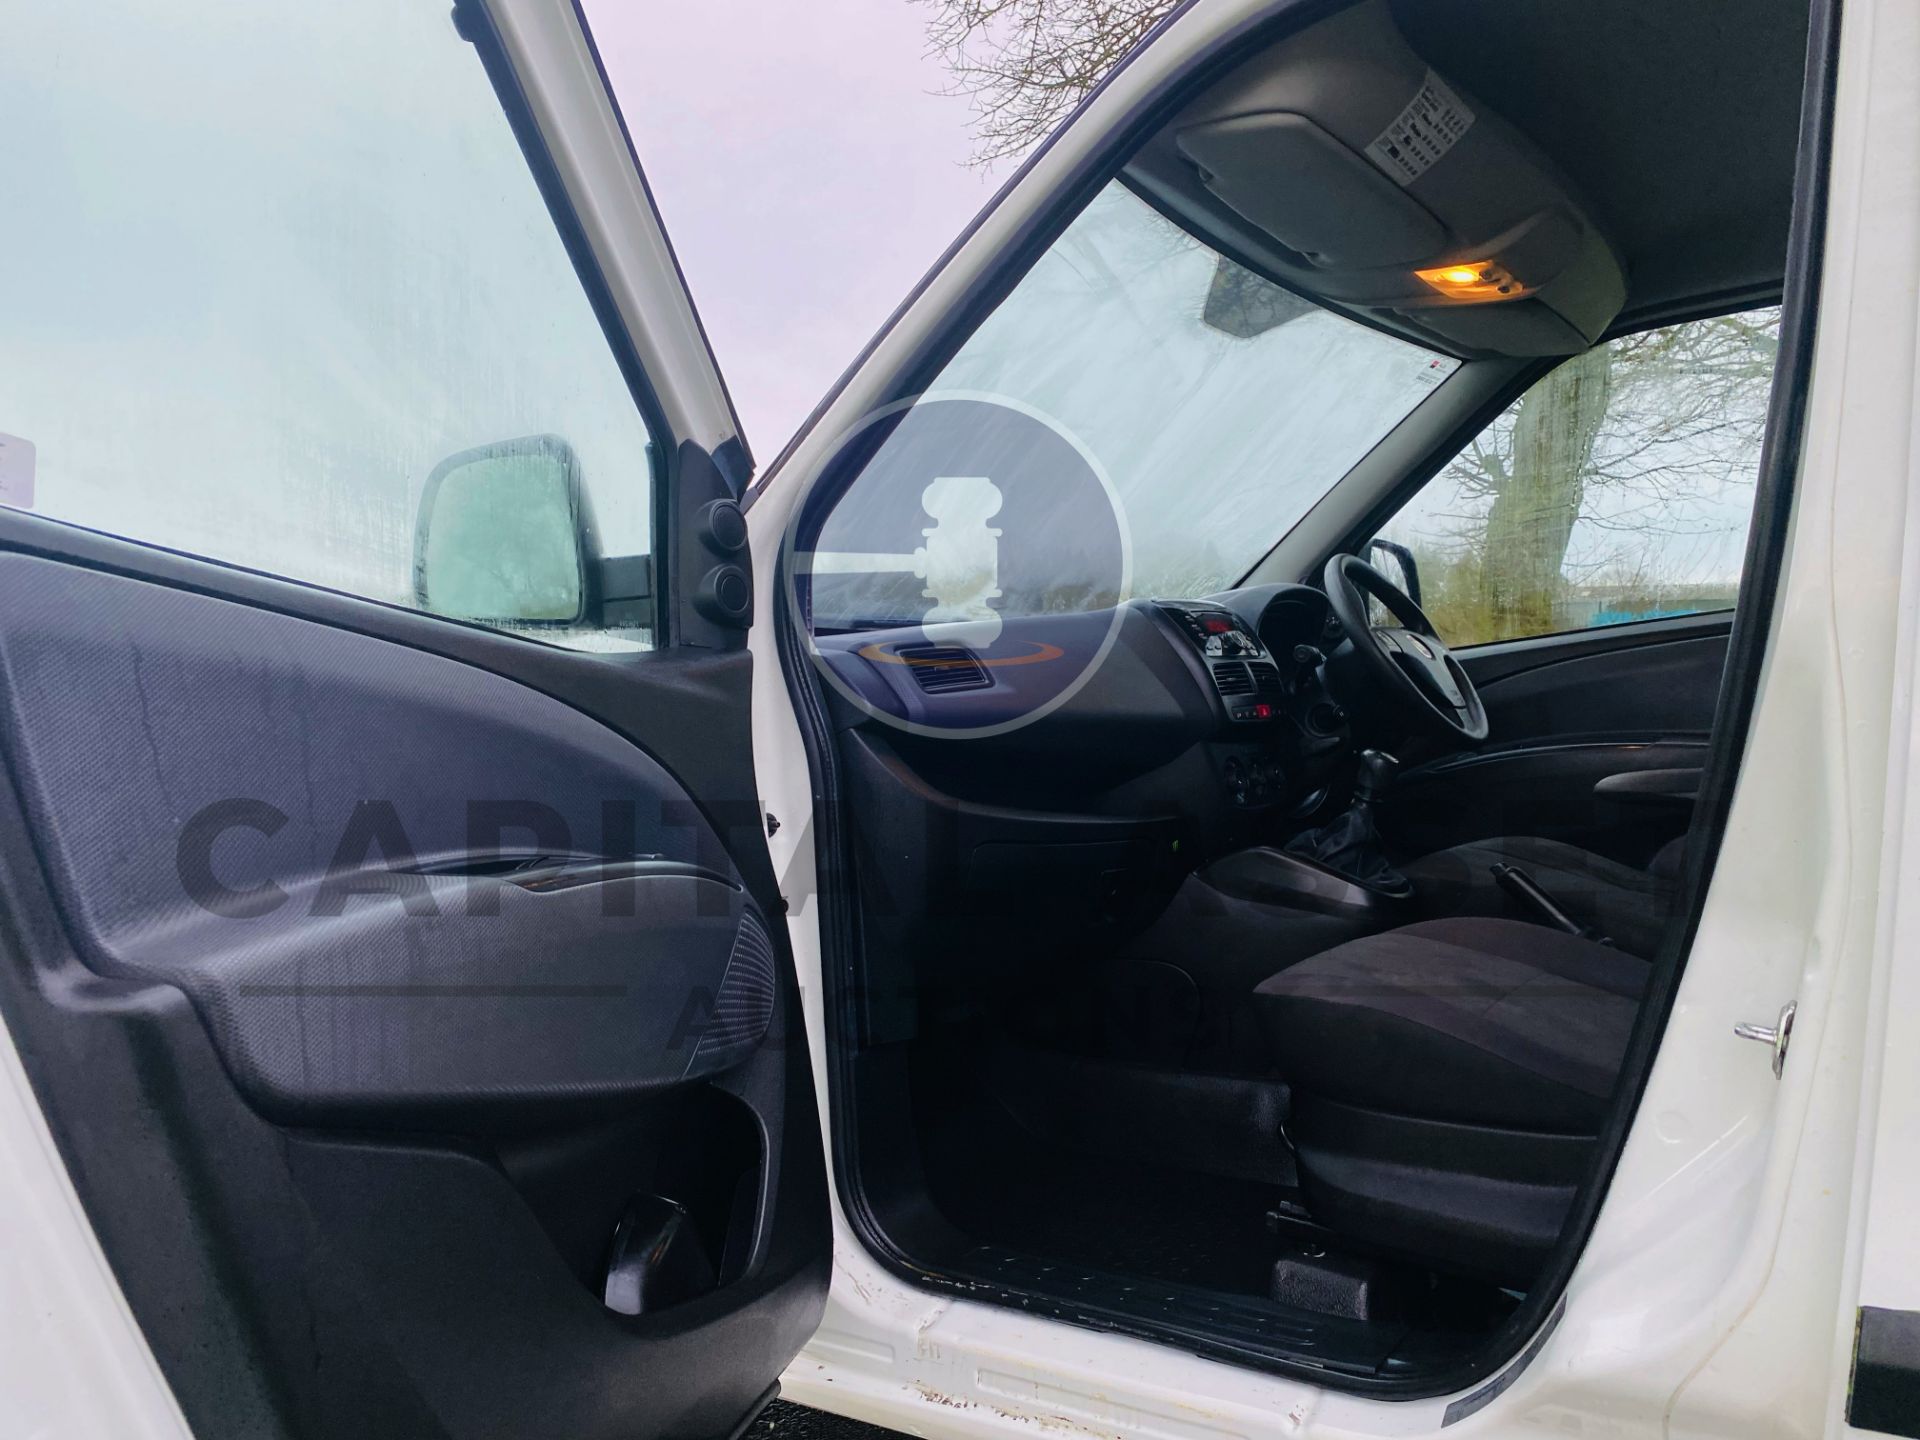 FIAT DOBLO 1.6 MULTIJET LWB "EURO 6" AIR CON - ONLY 46793 MILES! - 19 REG - (NEW SHAPE) - - Image 18 of 23